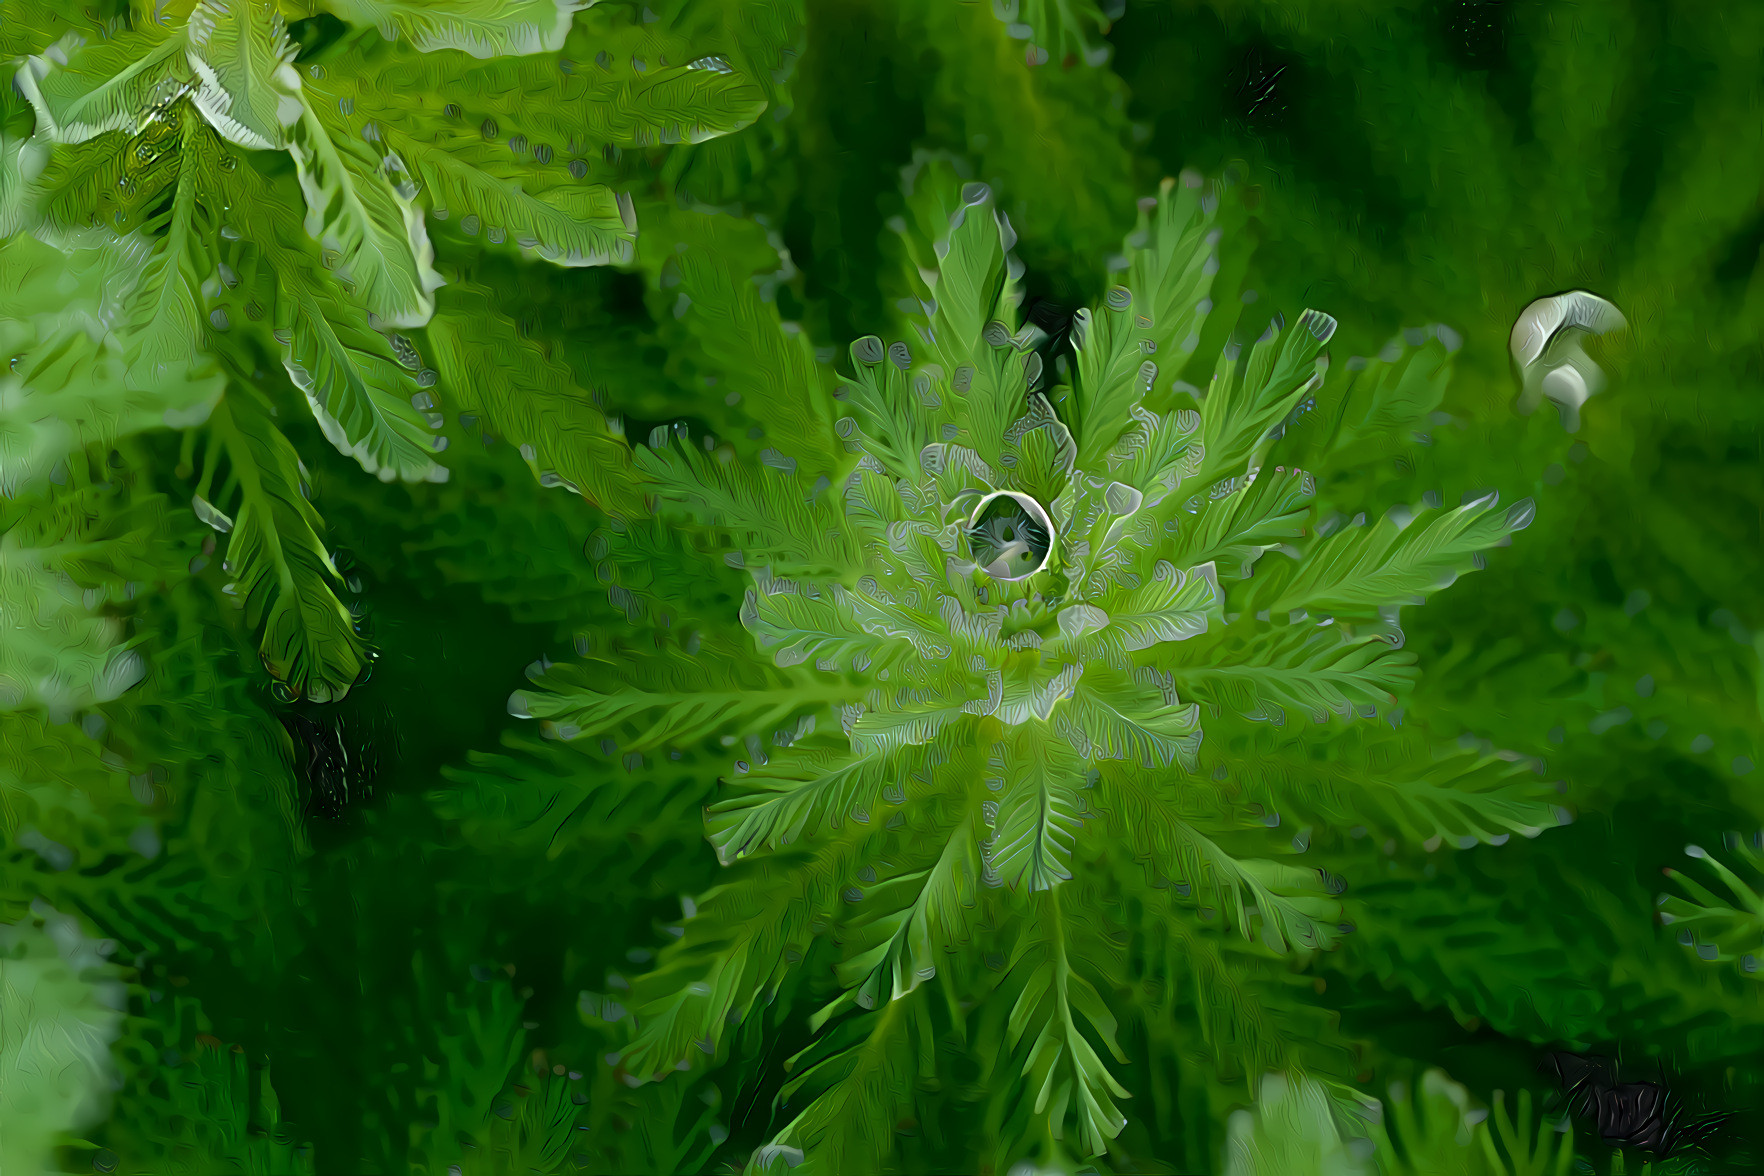 Summer Dew on the Green Plants